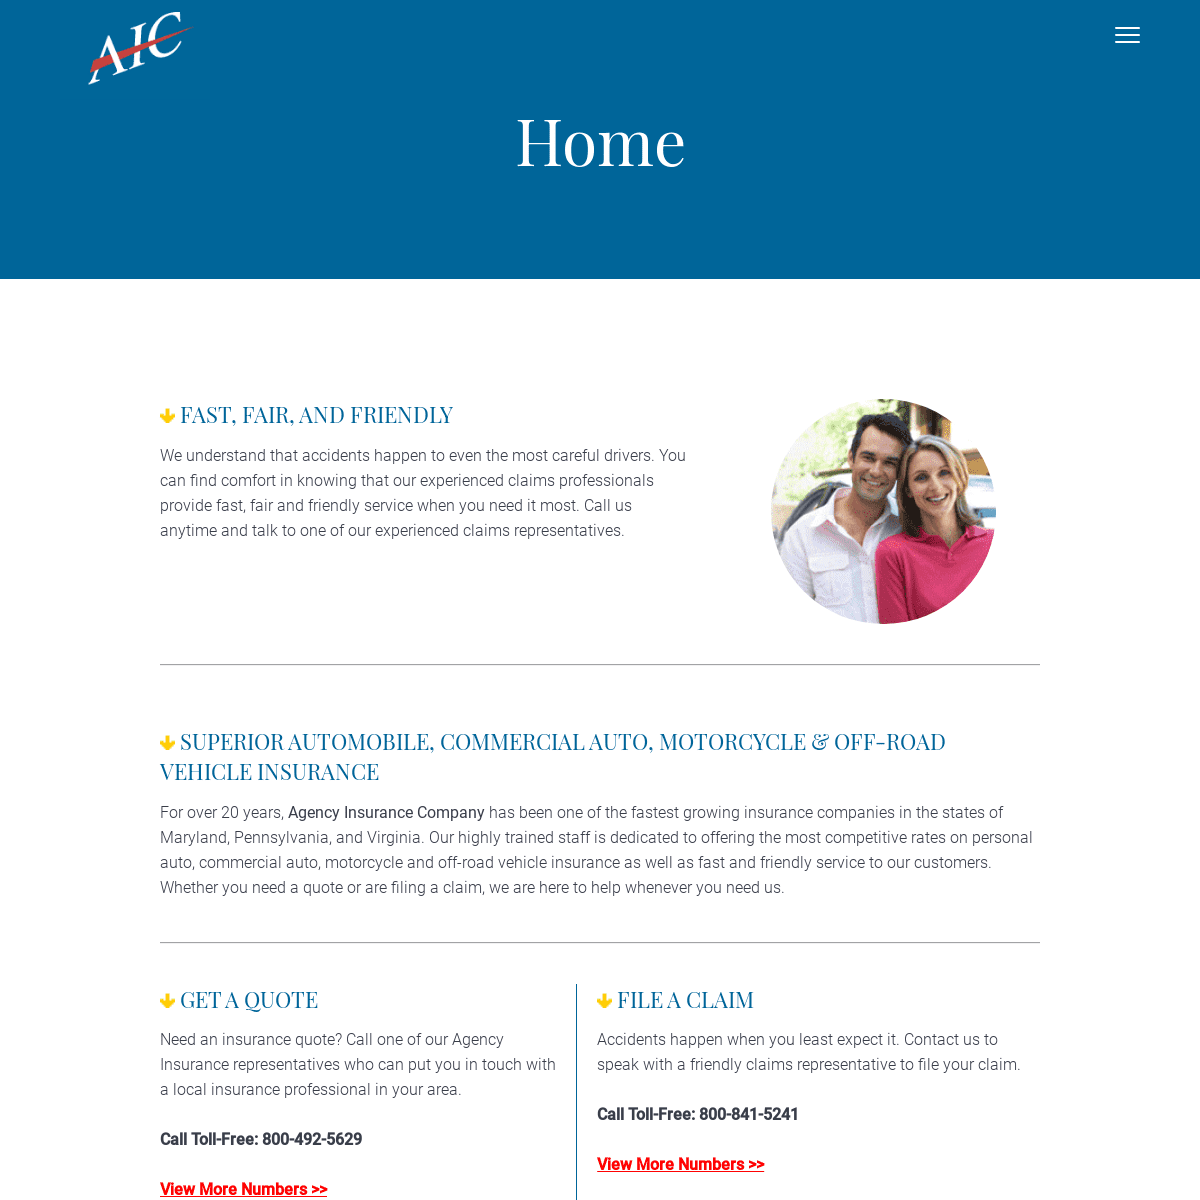 A complete backup of https://agencyinsurancecompany.com